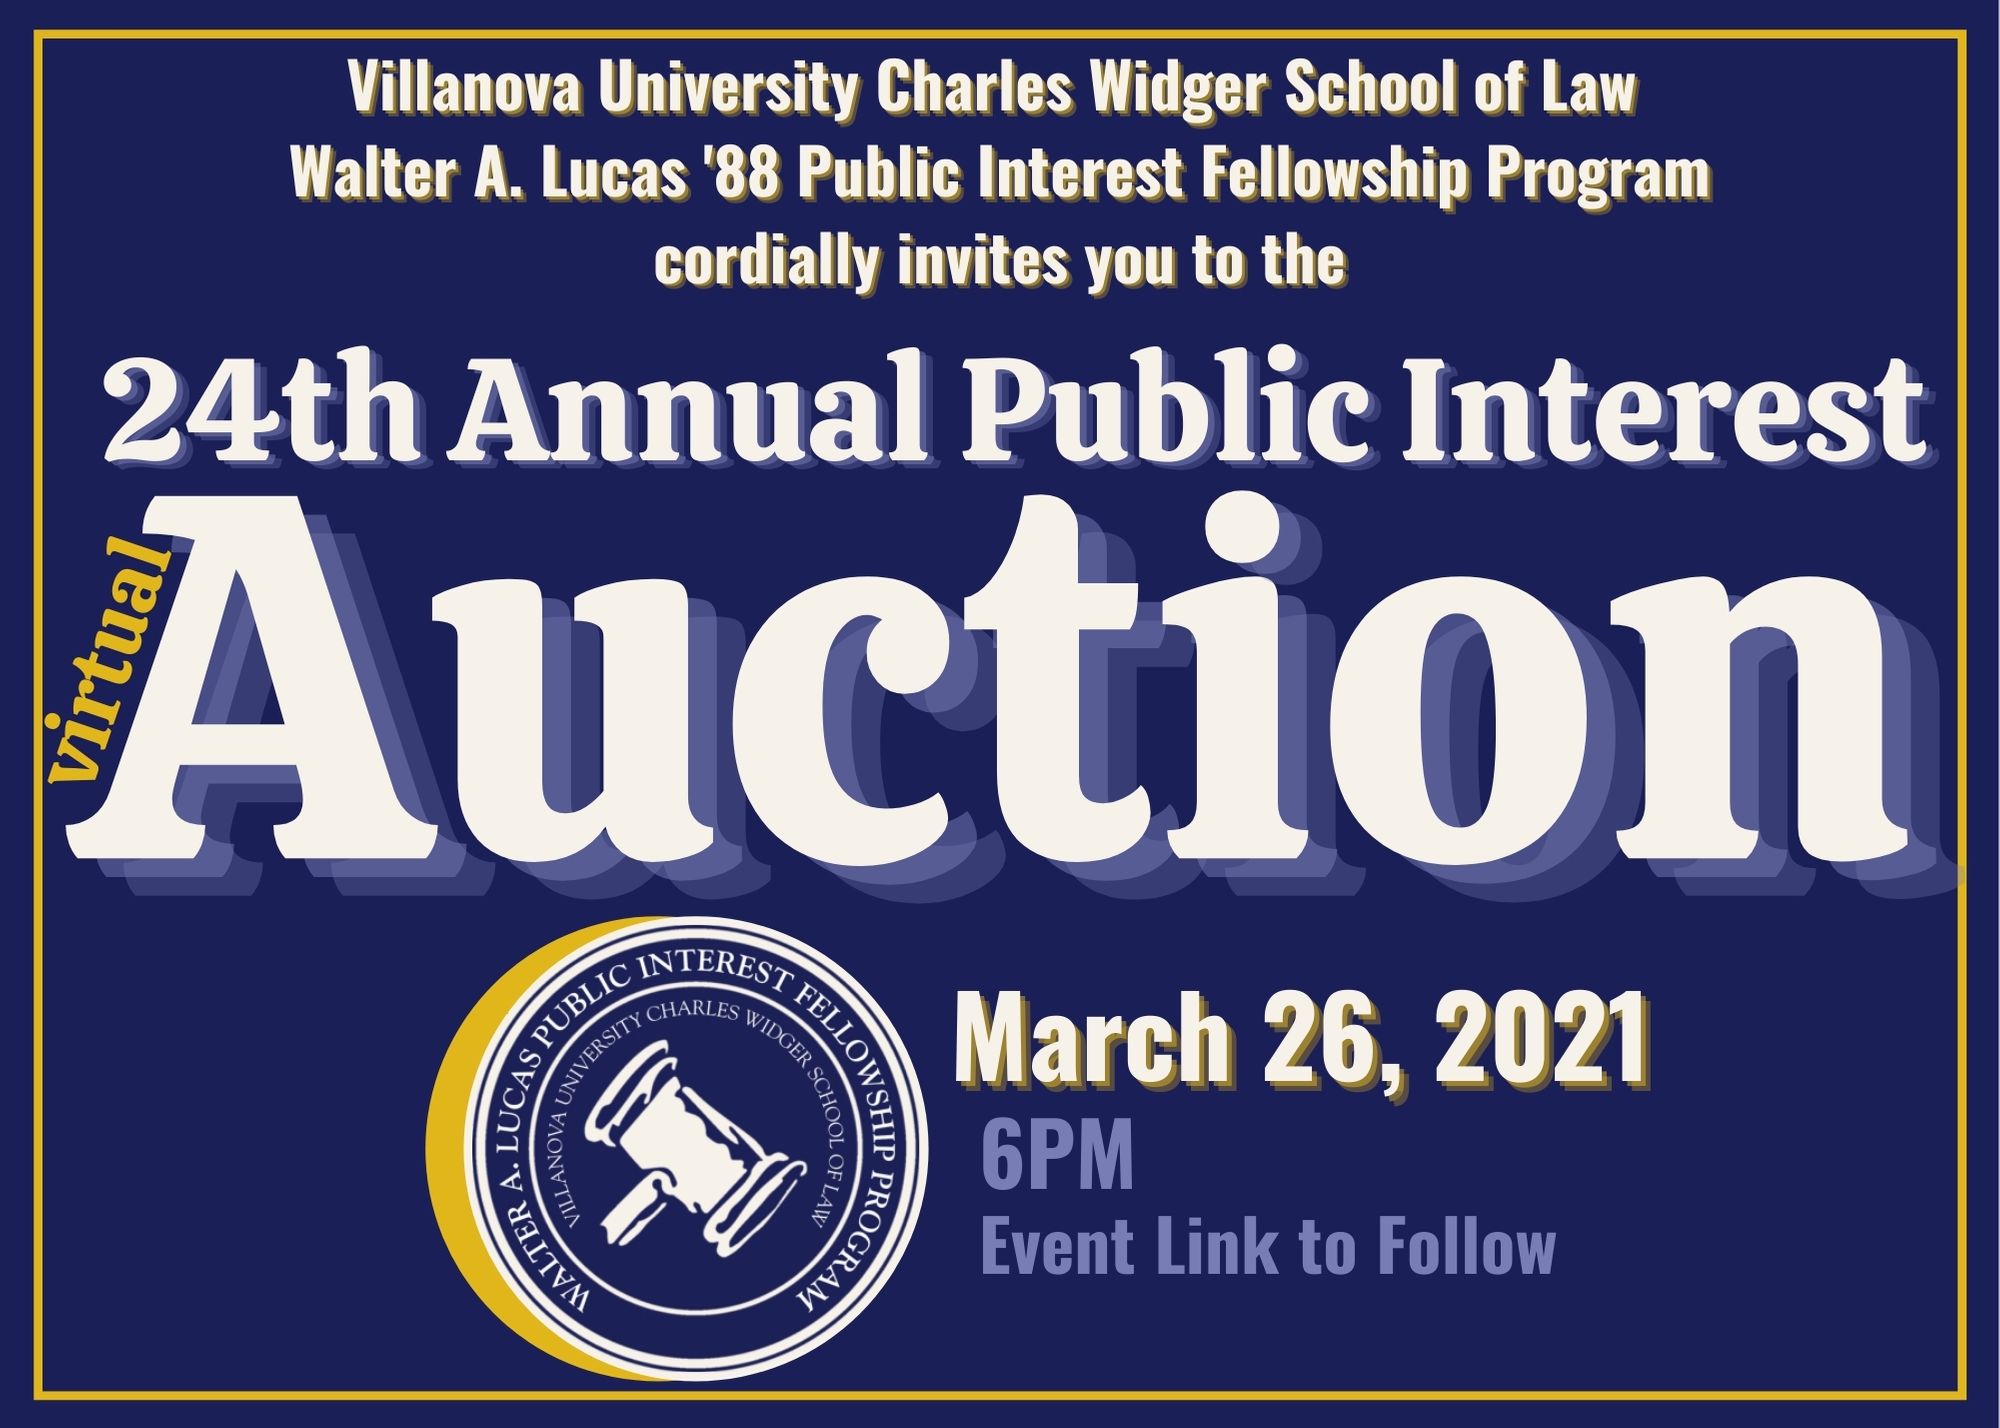 24th Annual Public Interest Auction Flyer Friday March 26, 2021 at 6 PM Registration link to follow